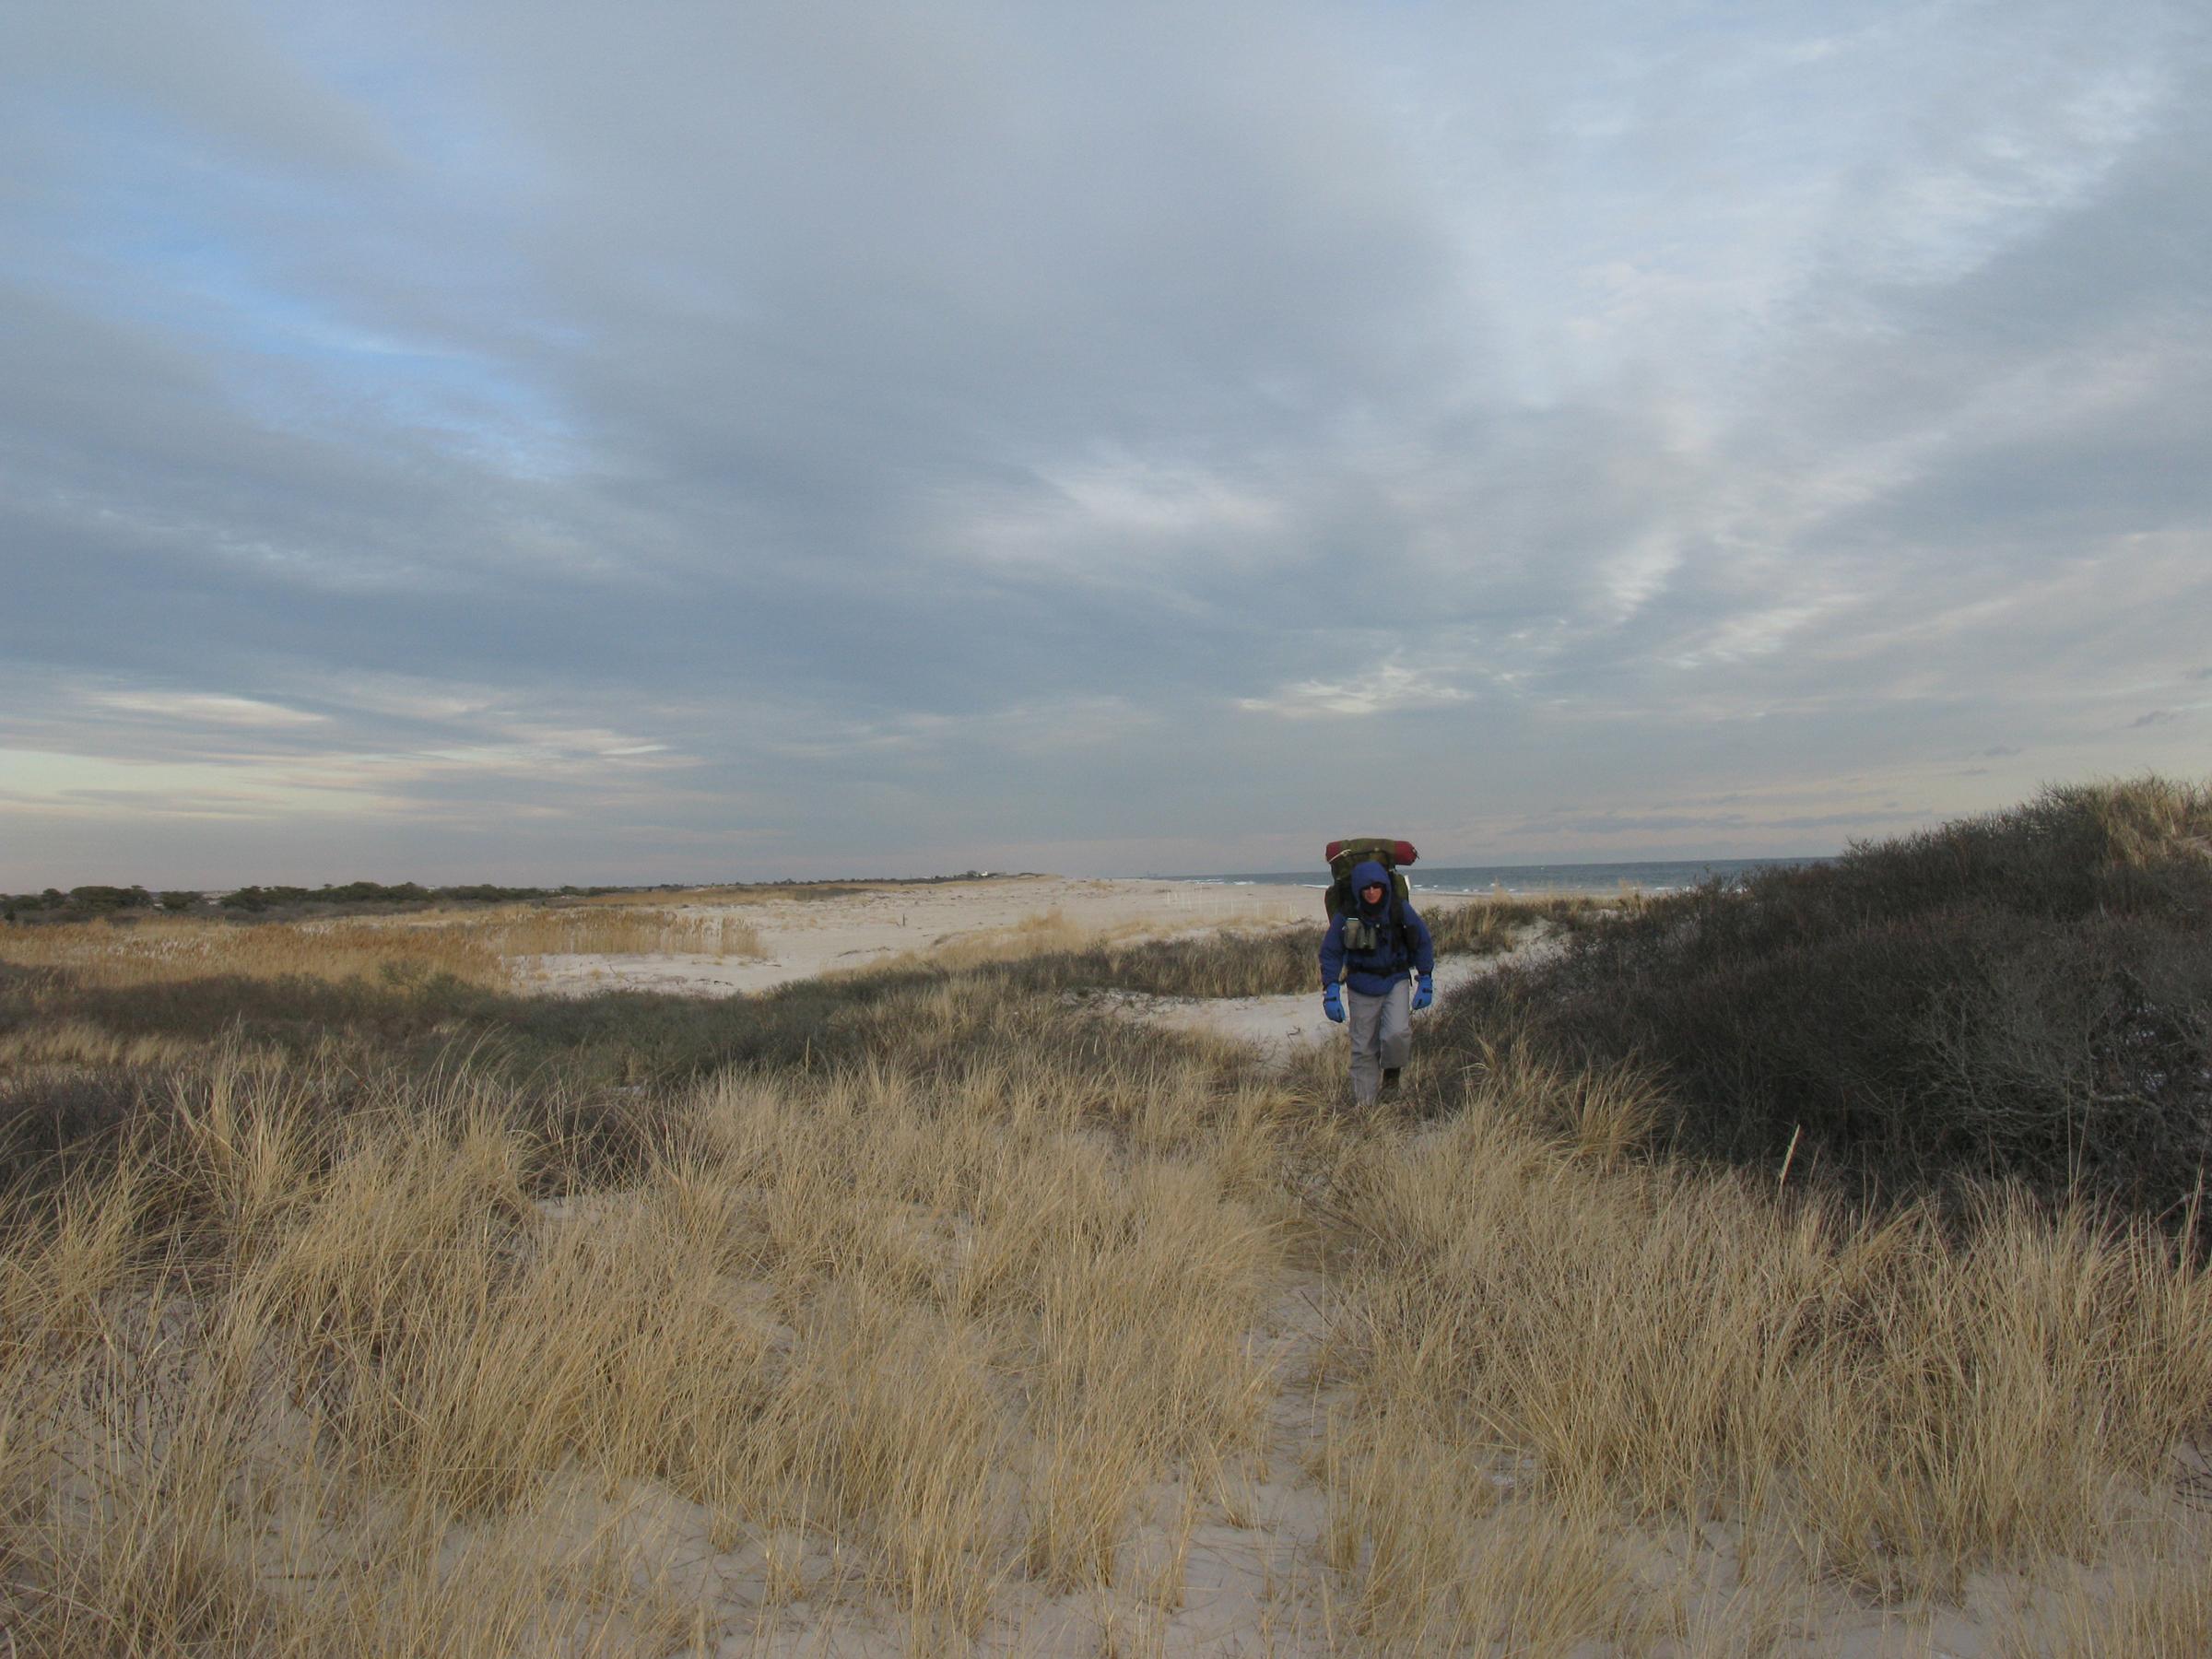 A man with a large backpack hikes through a sandy beach wilderness